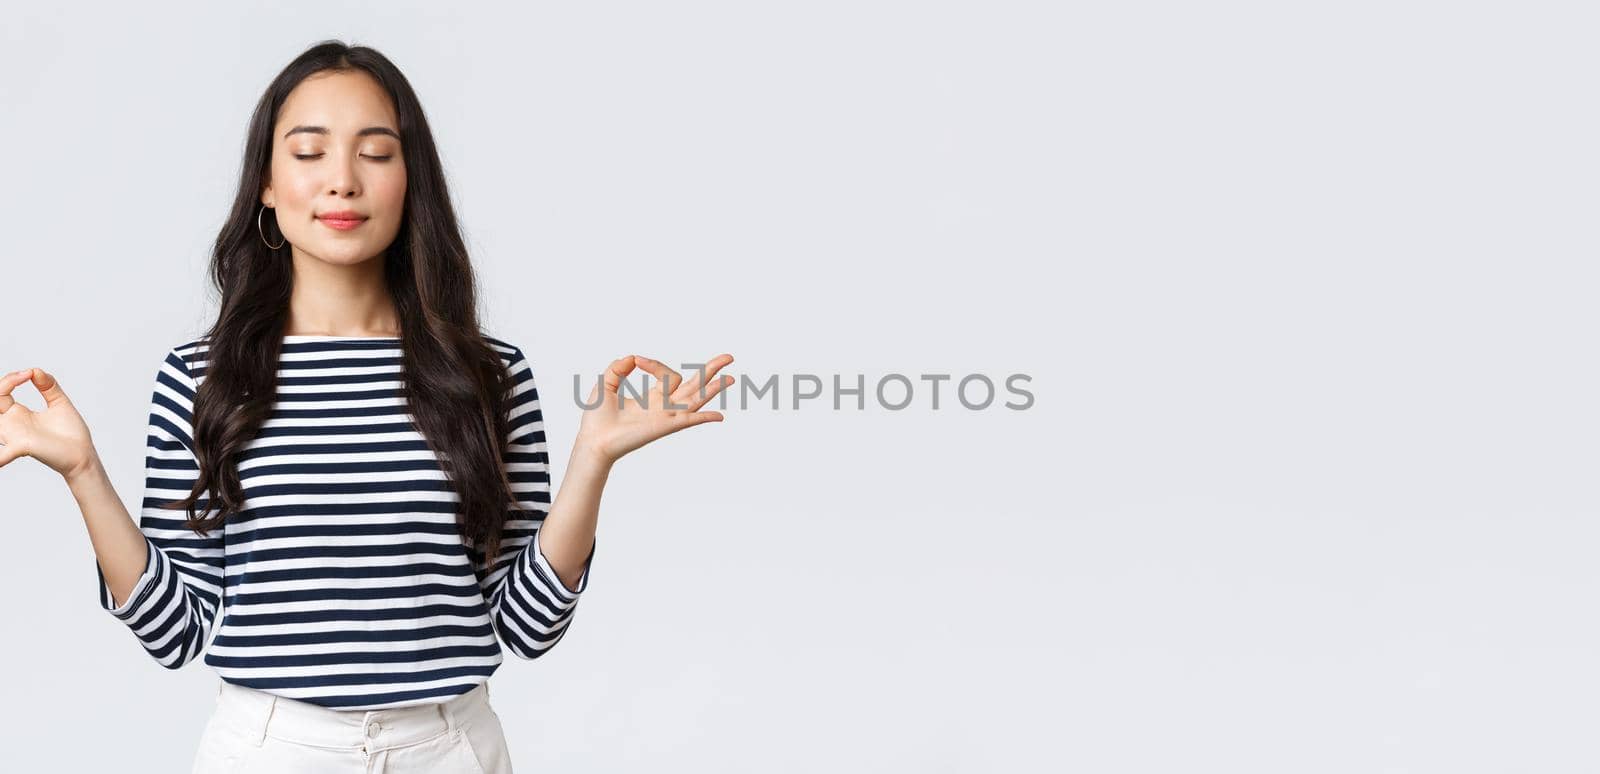 Lifestyle, people emotions and casual concept. Relaxed and patient smiling young asian woman with closed eyes meditating to calm down, do breathing exercises with hands in zen gesture.